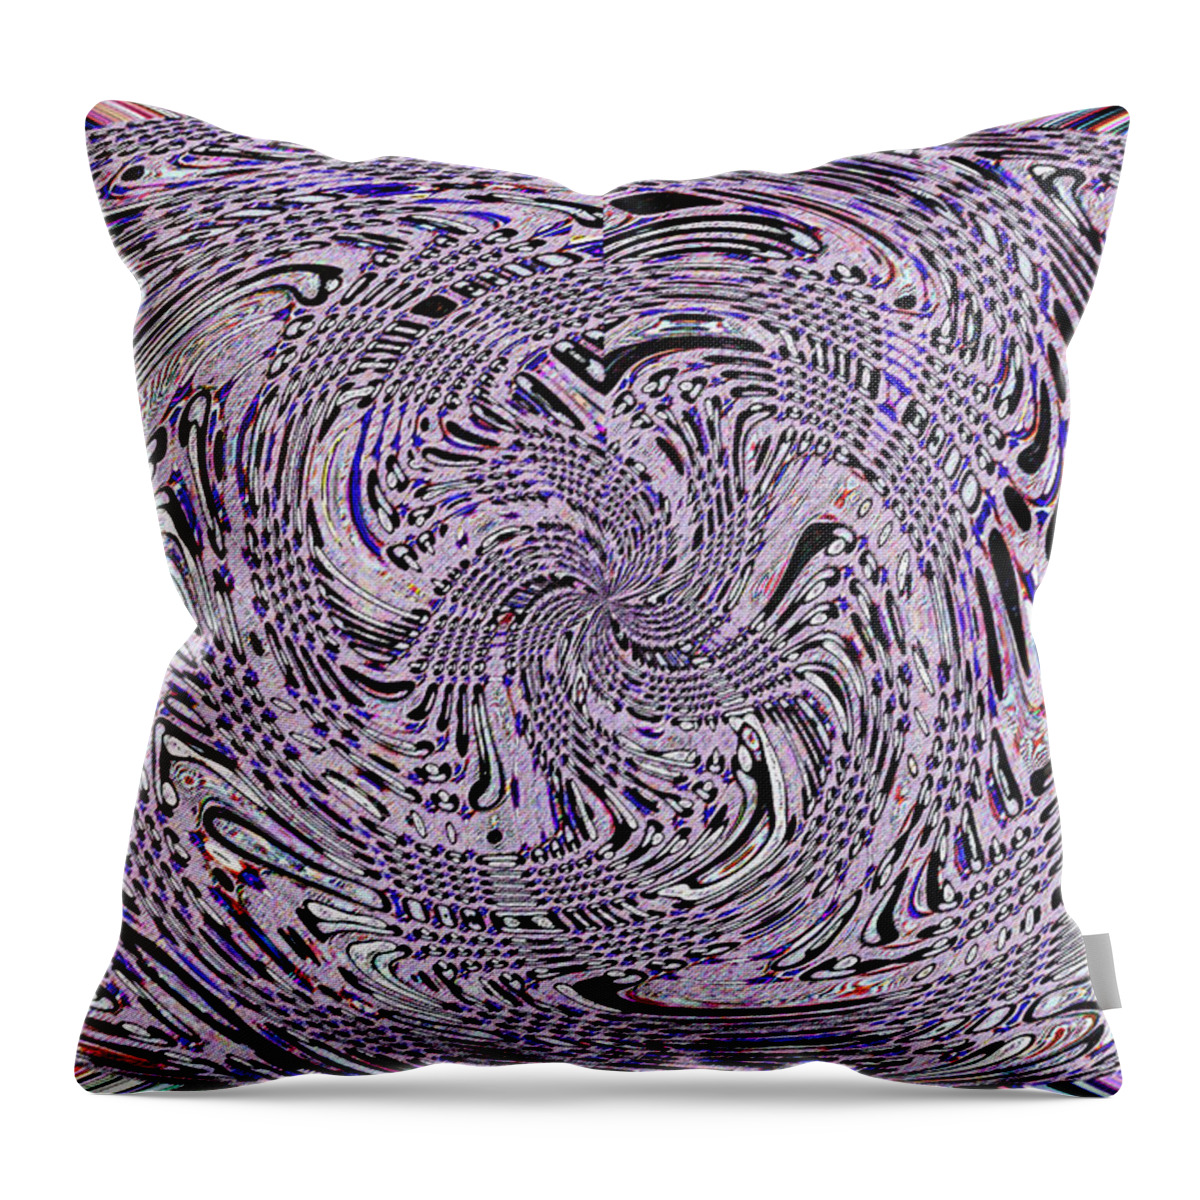 The Birds A Janca Abstract Throw Pillow featuring the digital art The Birds by Tom Janca